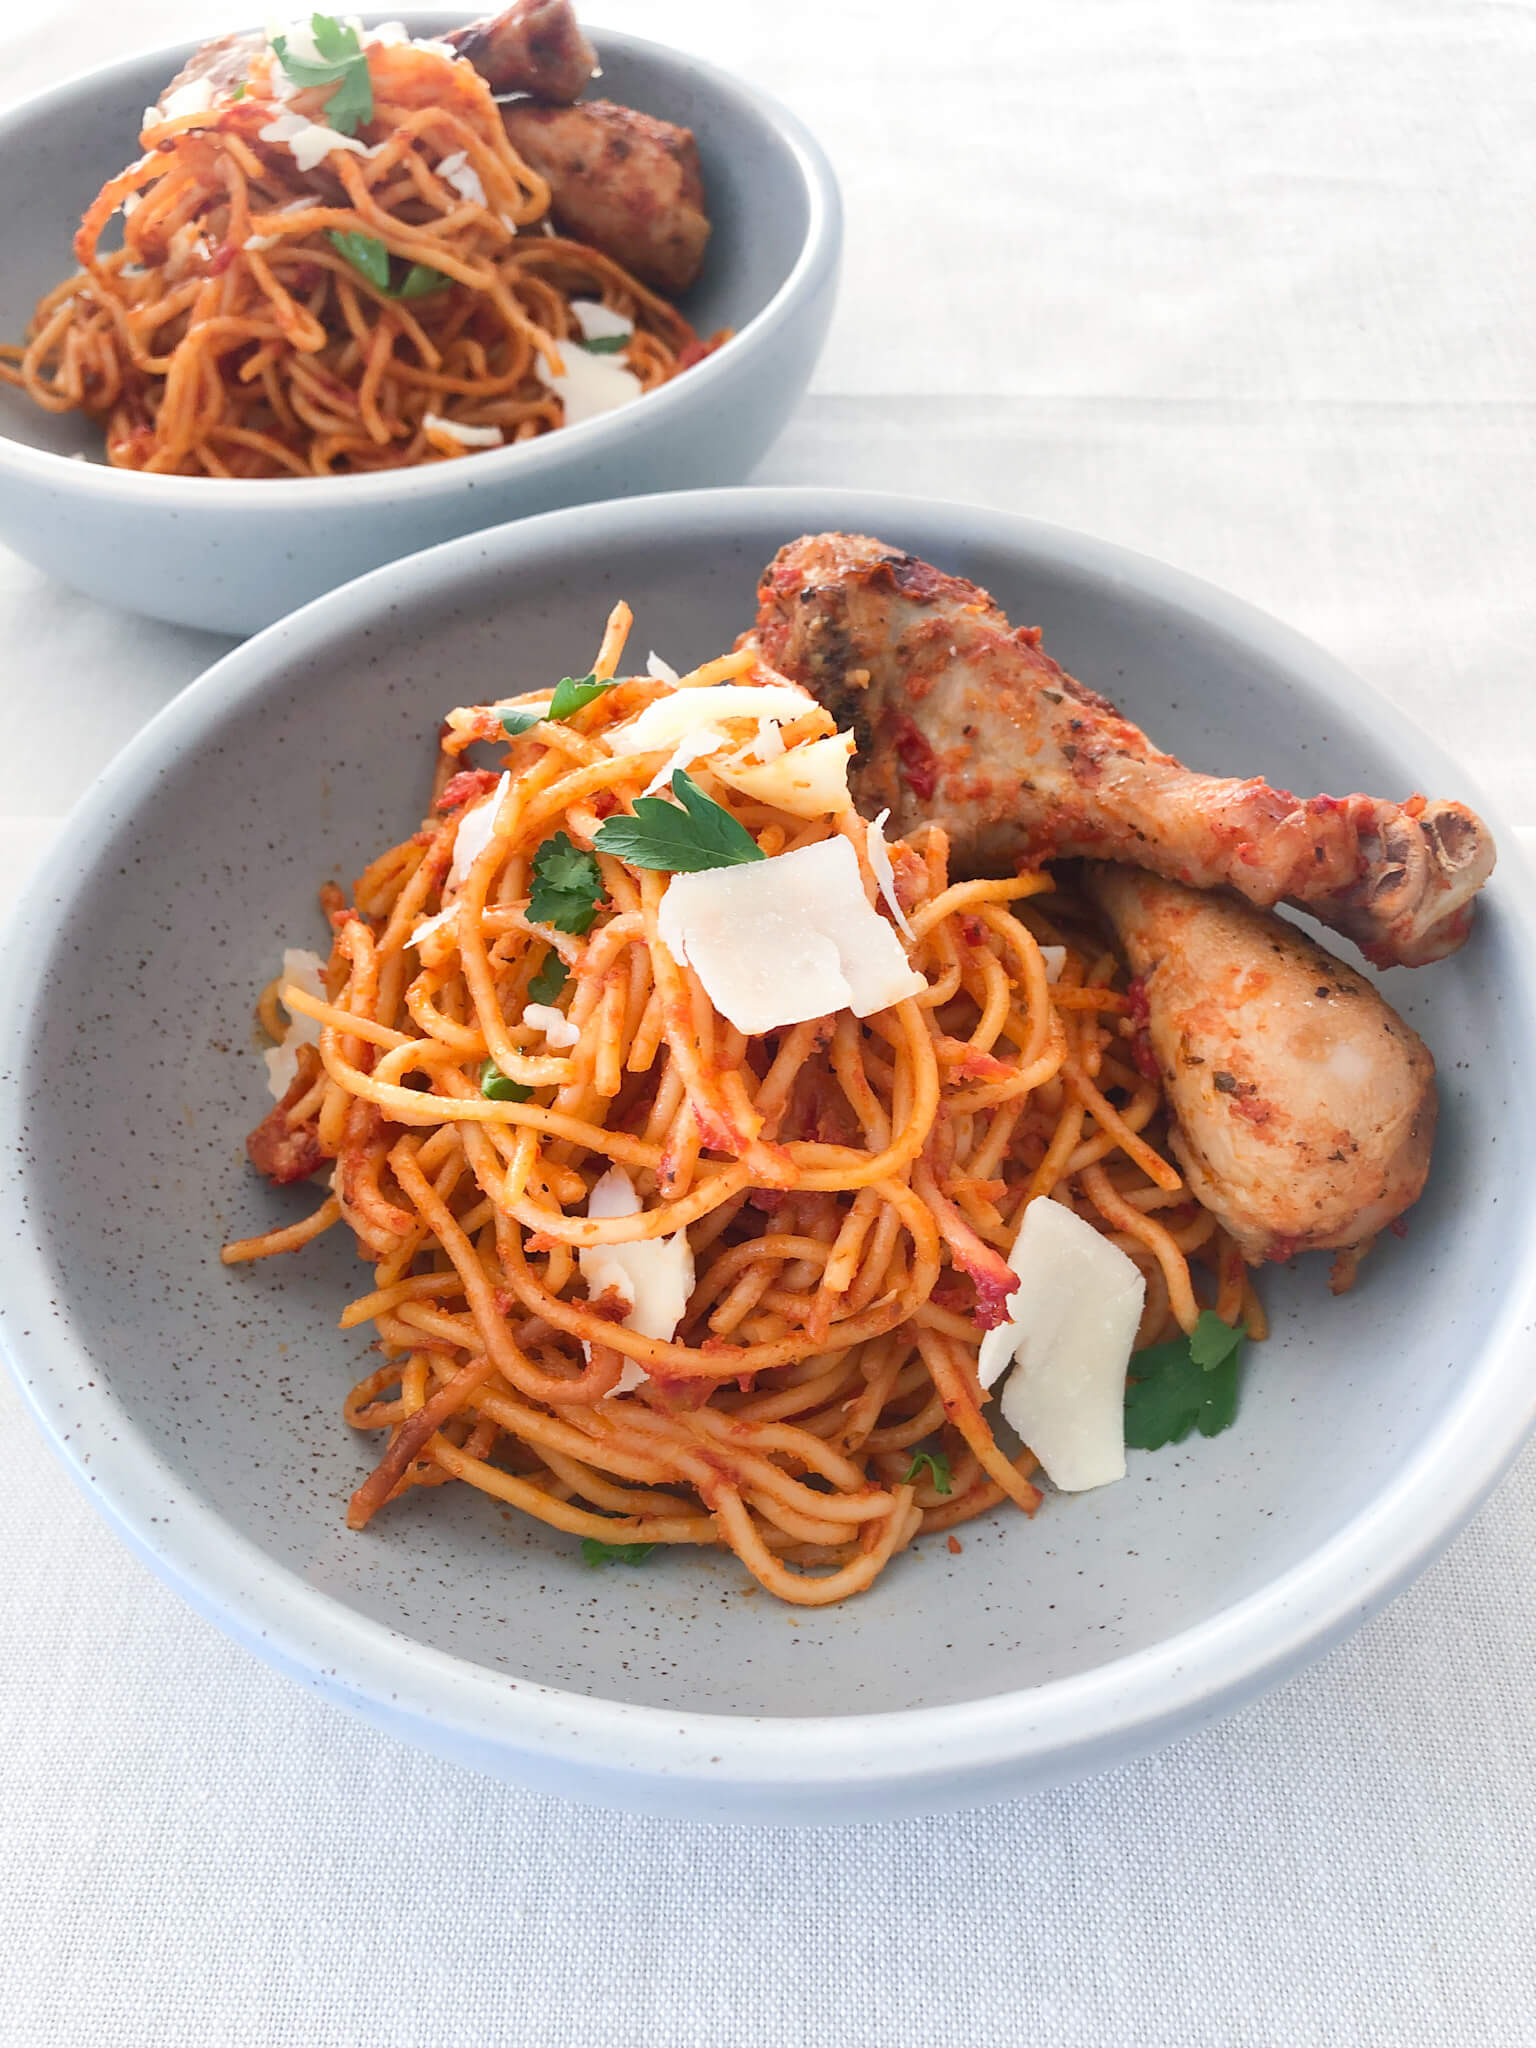 spaghetti with tomato sauce and chicken drumsticks